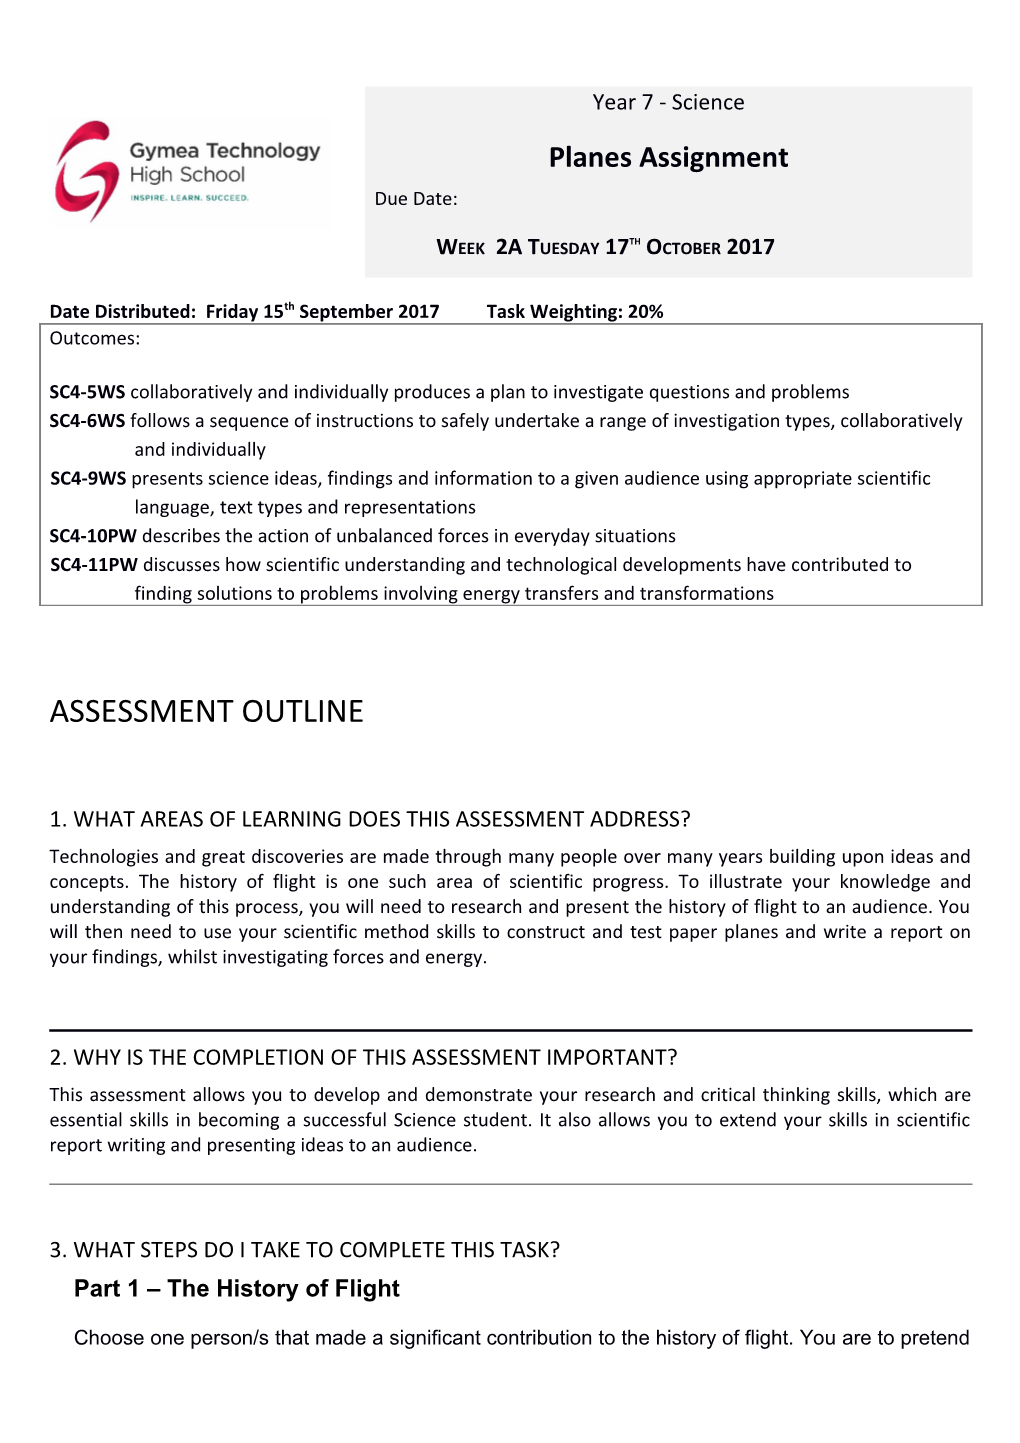 1. What Areas of Learning Does This Assessment Address?